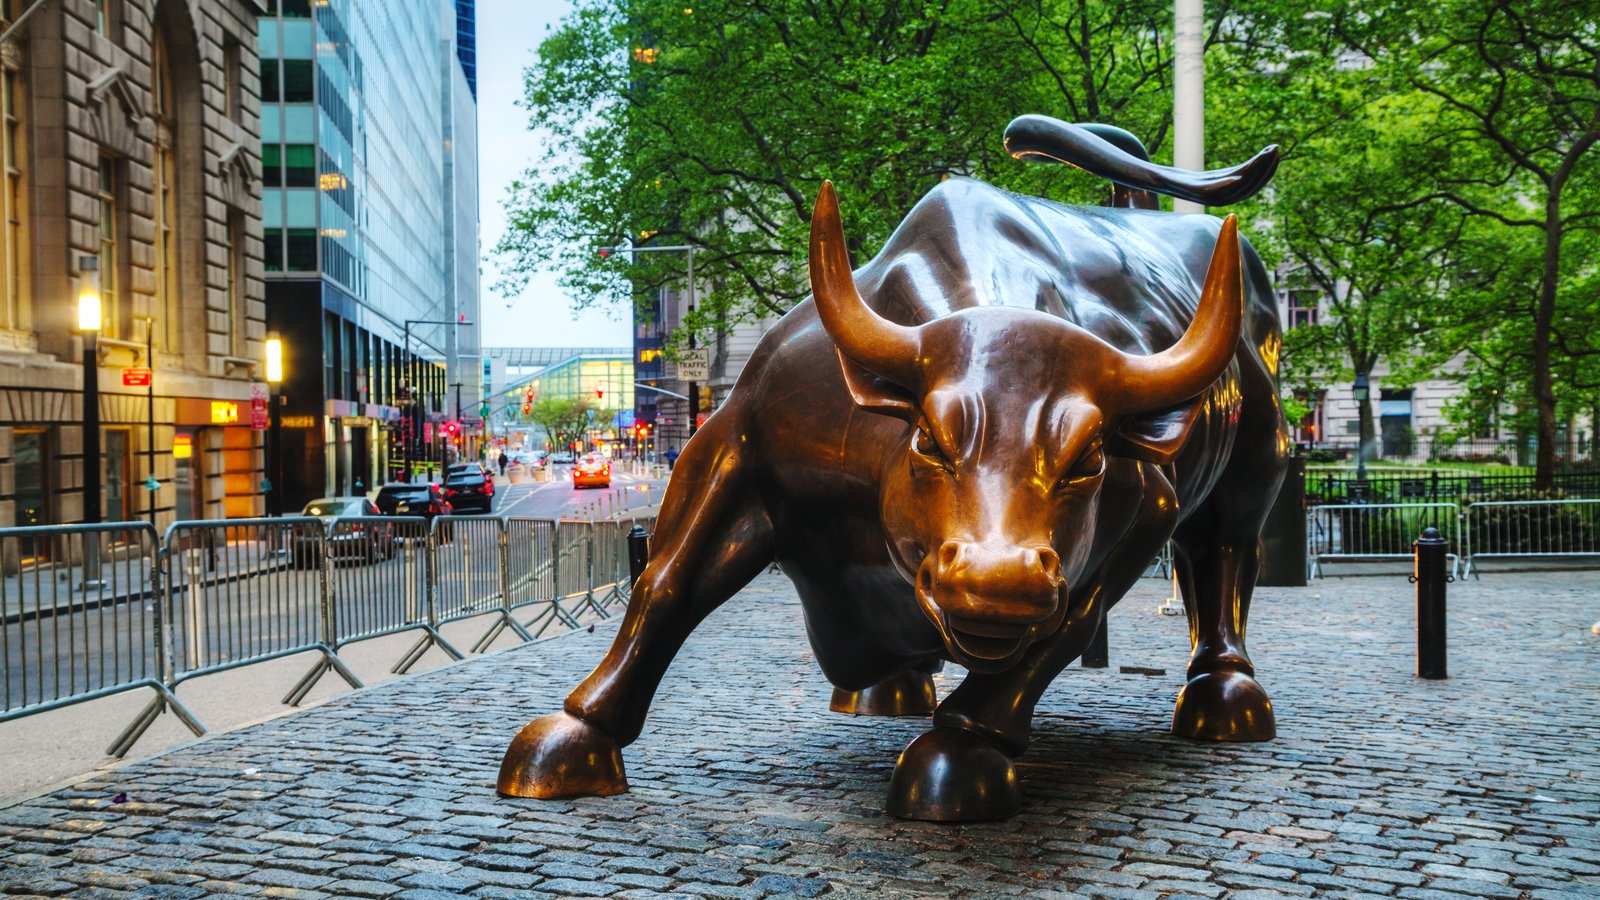 Image of the Wall Street Bull representing pre-market stock movers.